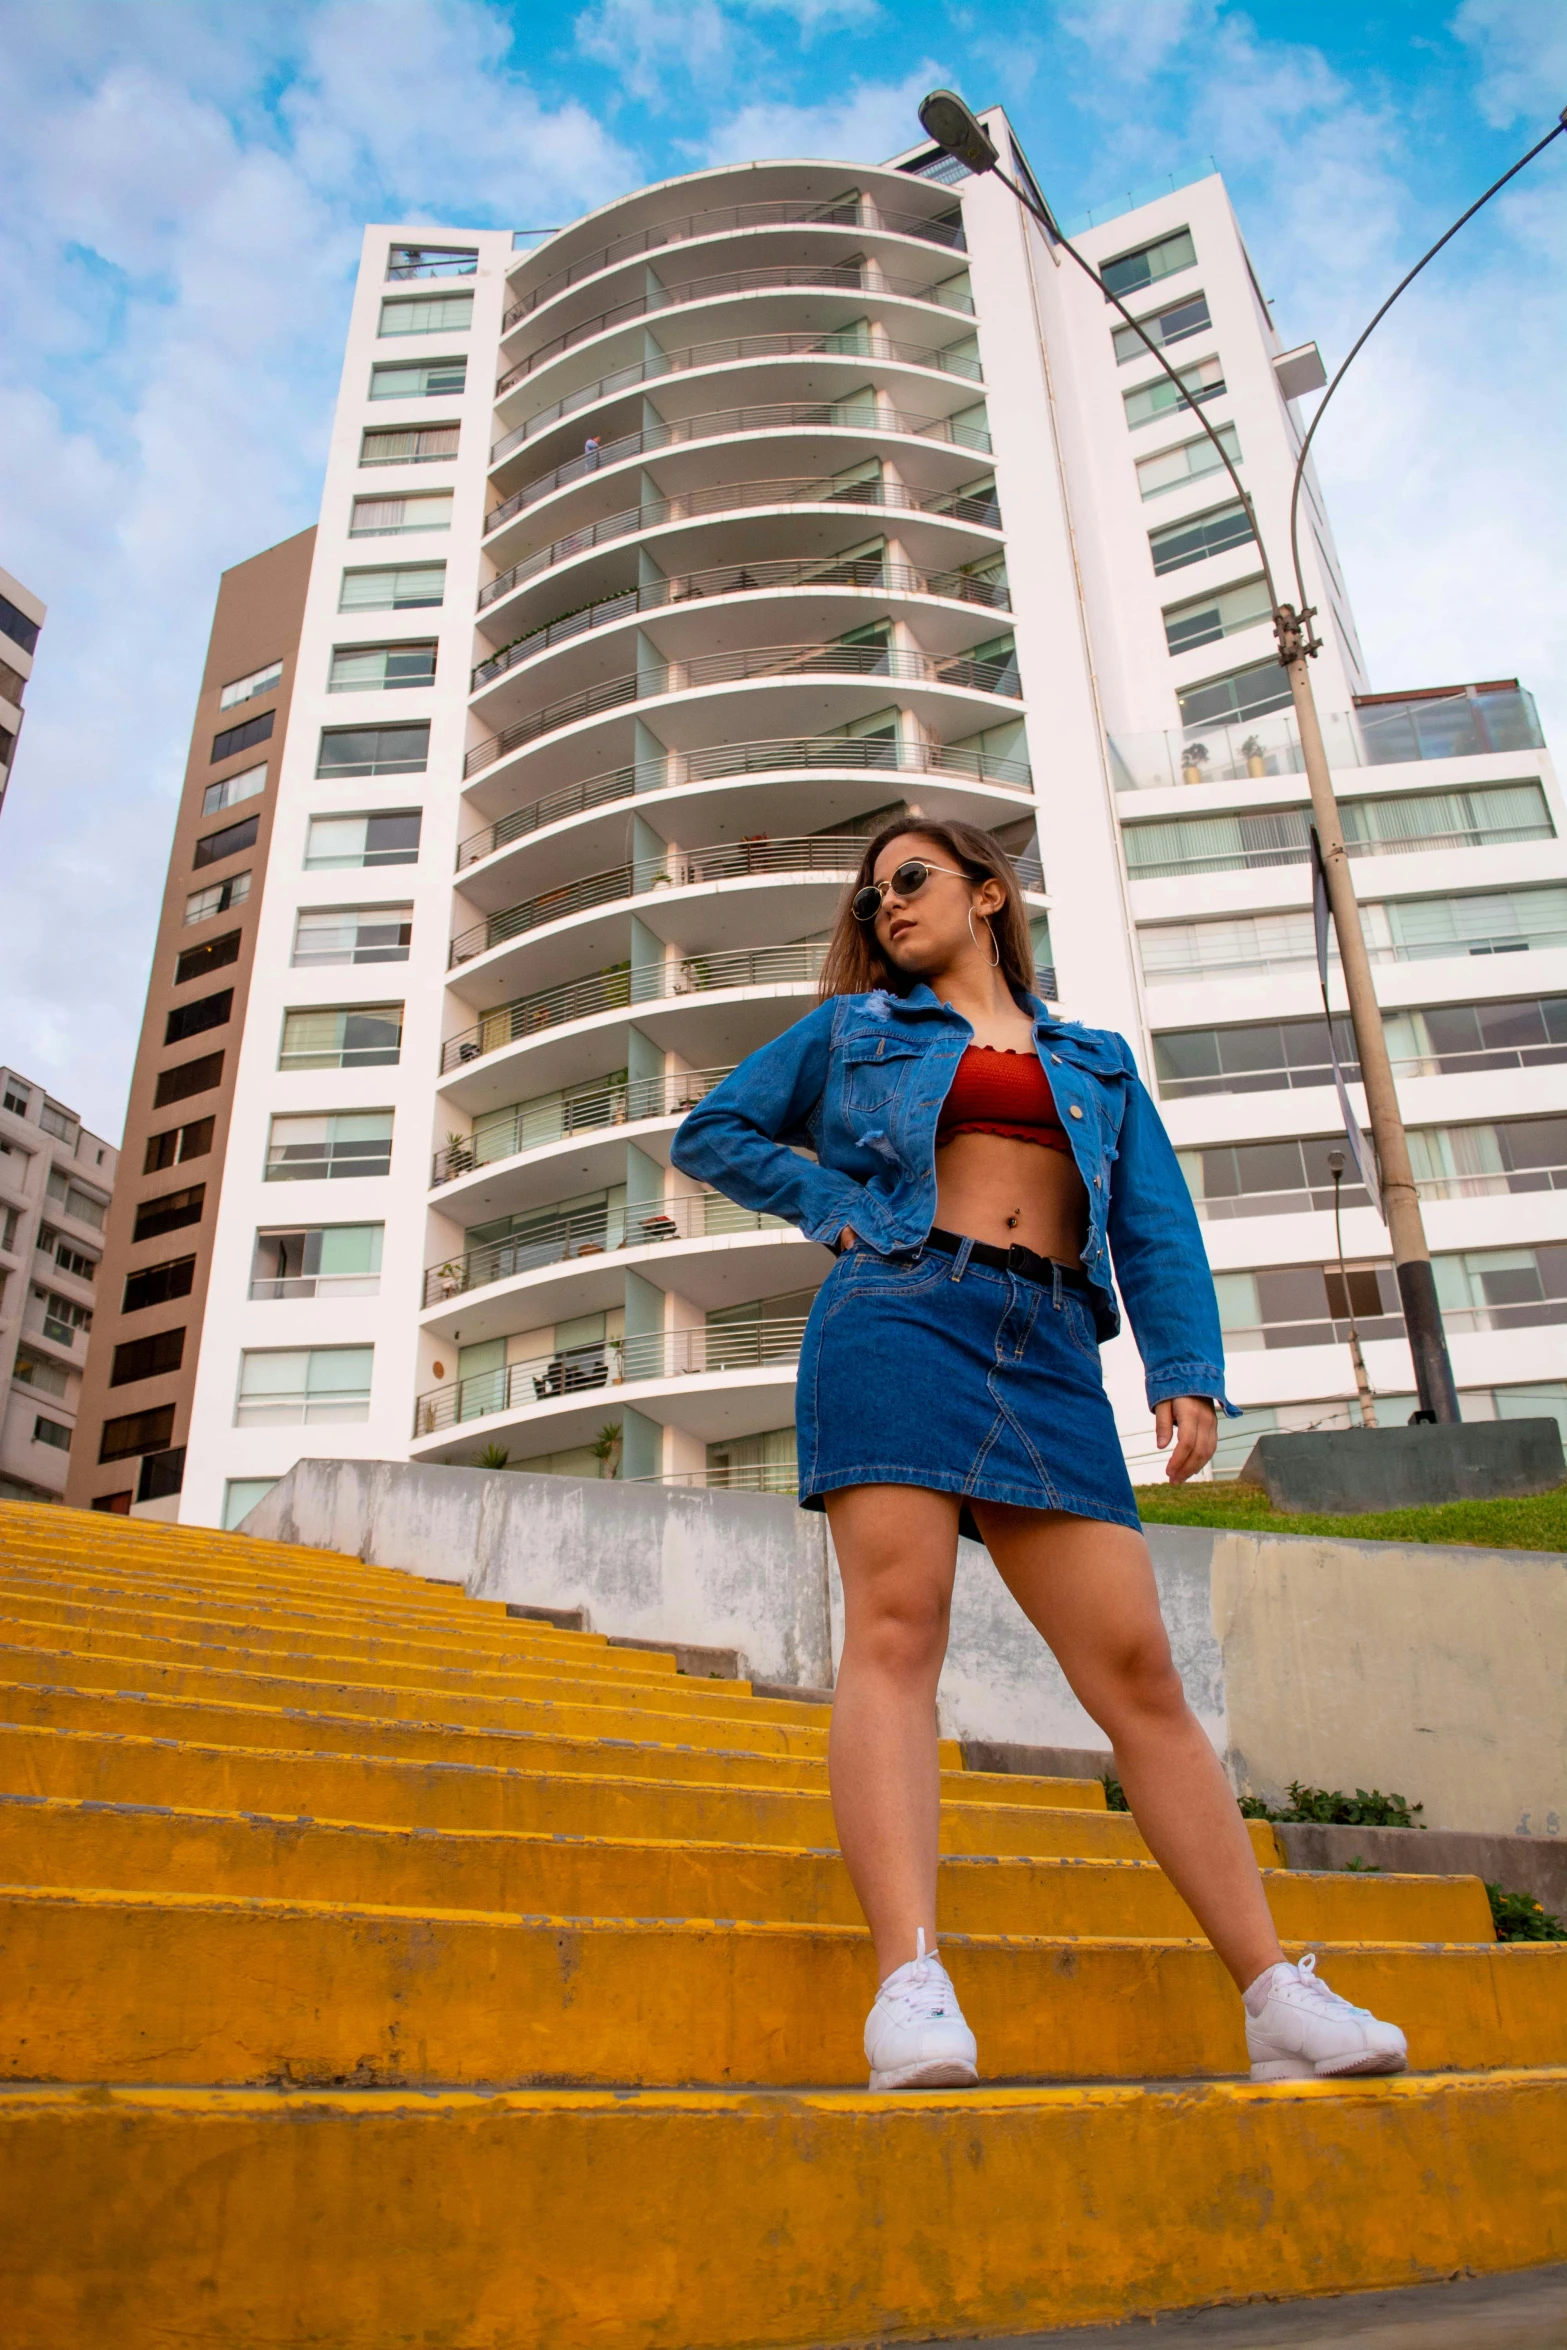 the woman is posing on the steps near some tall buildings